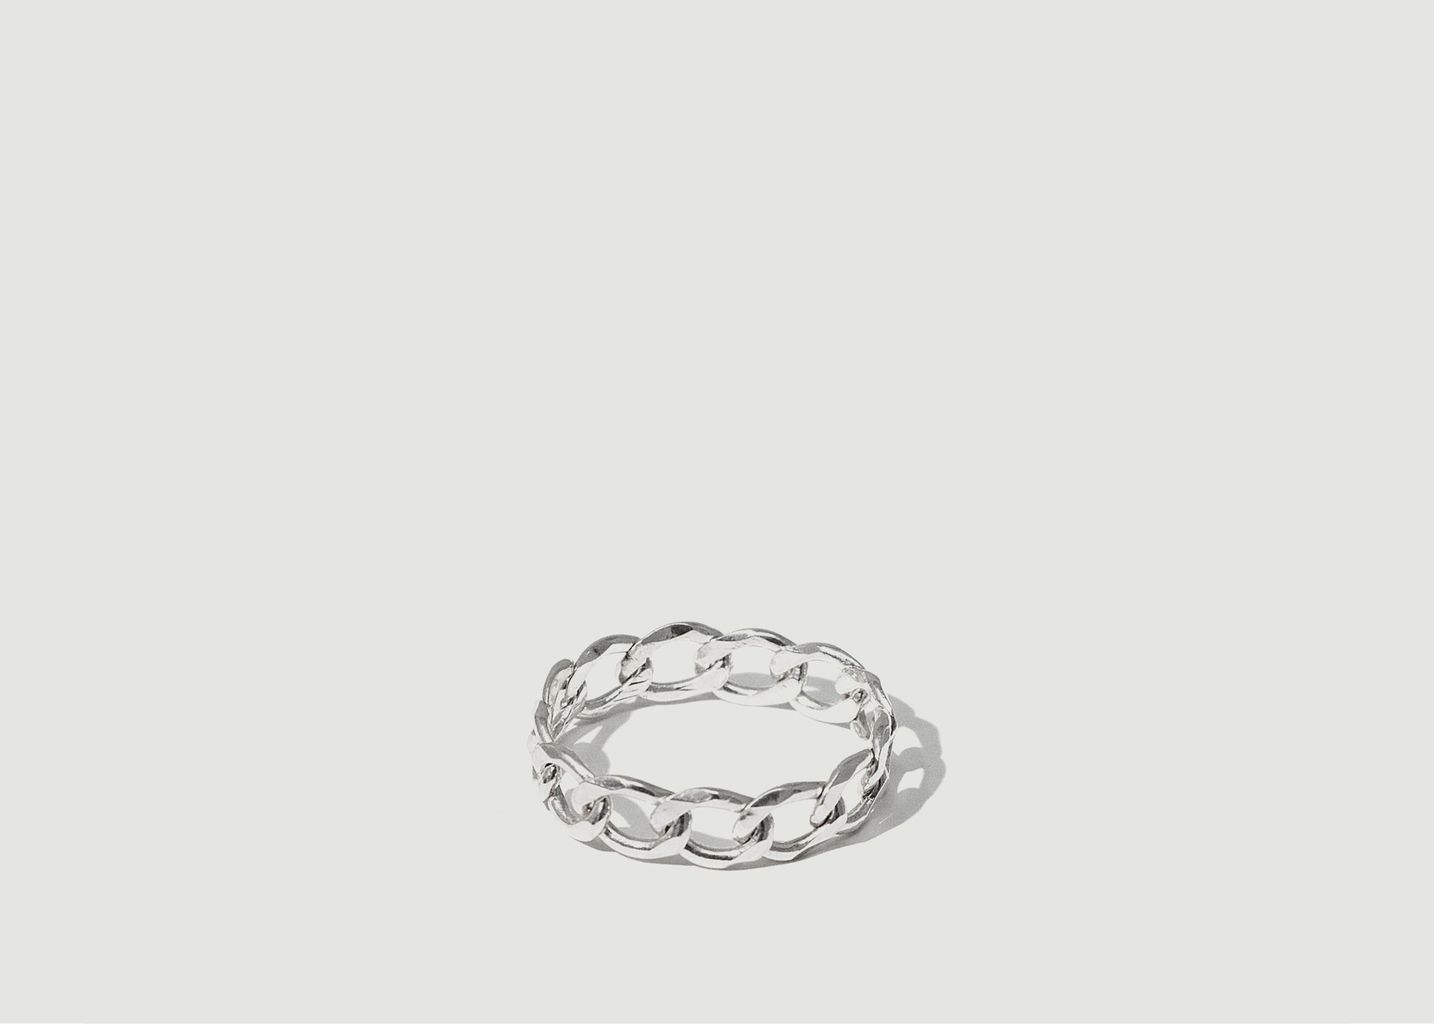 CLED Collapsible Chain Style A Ring